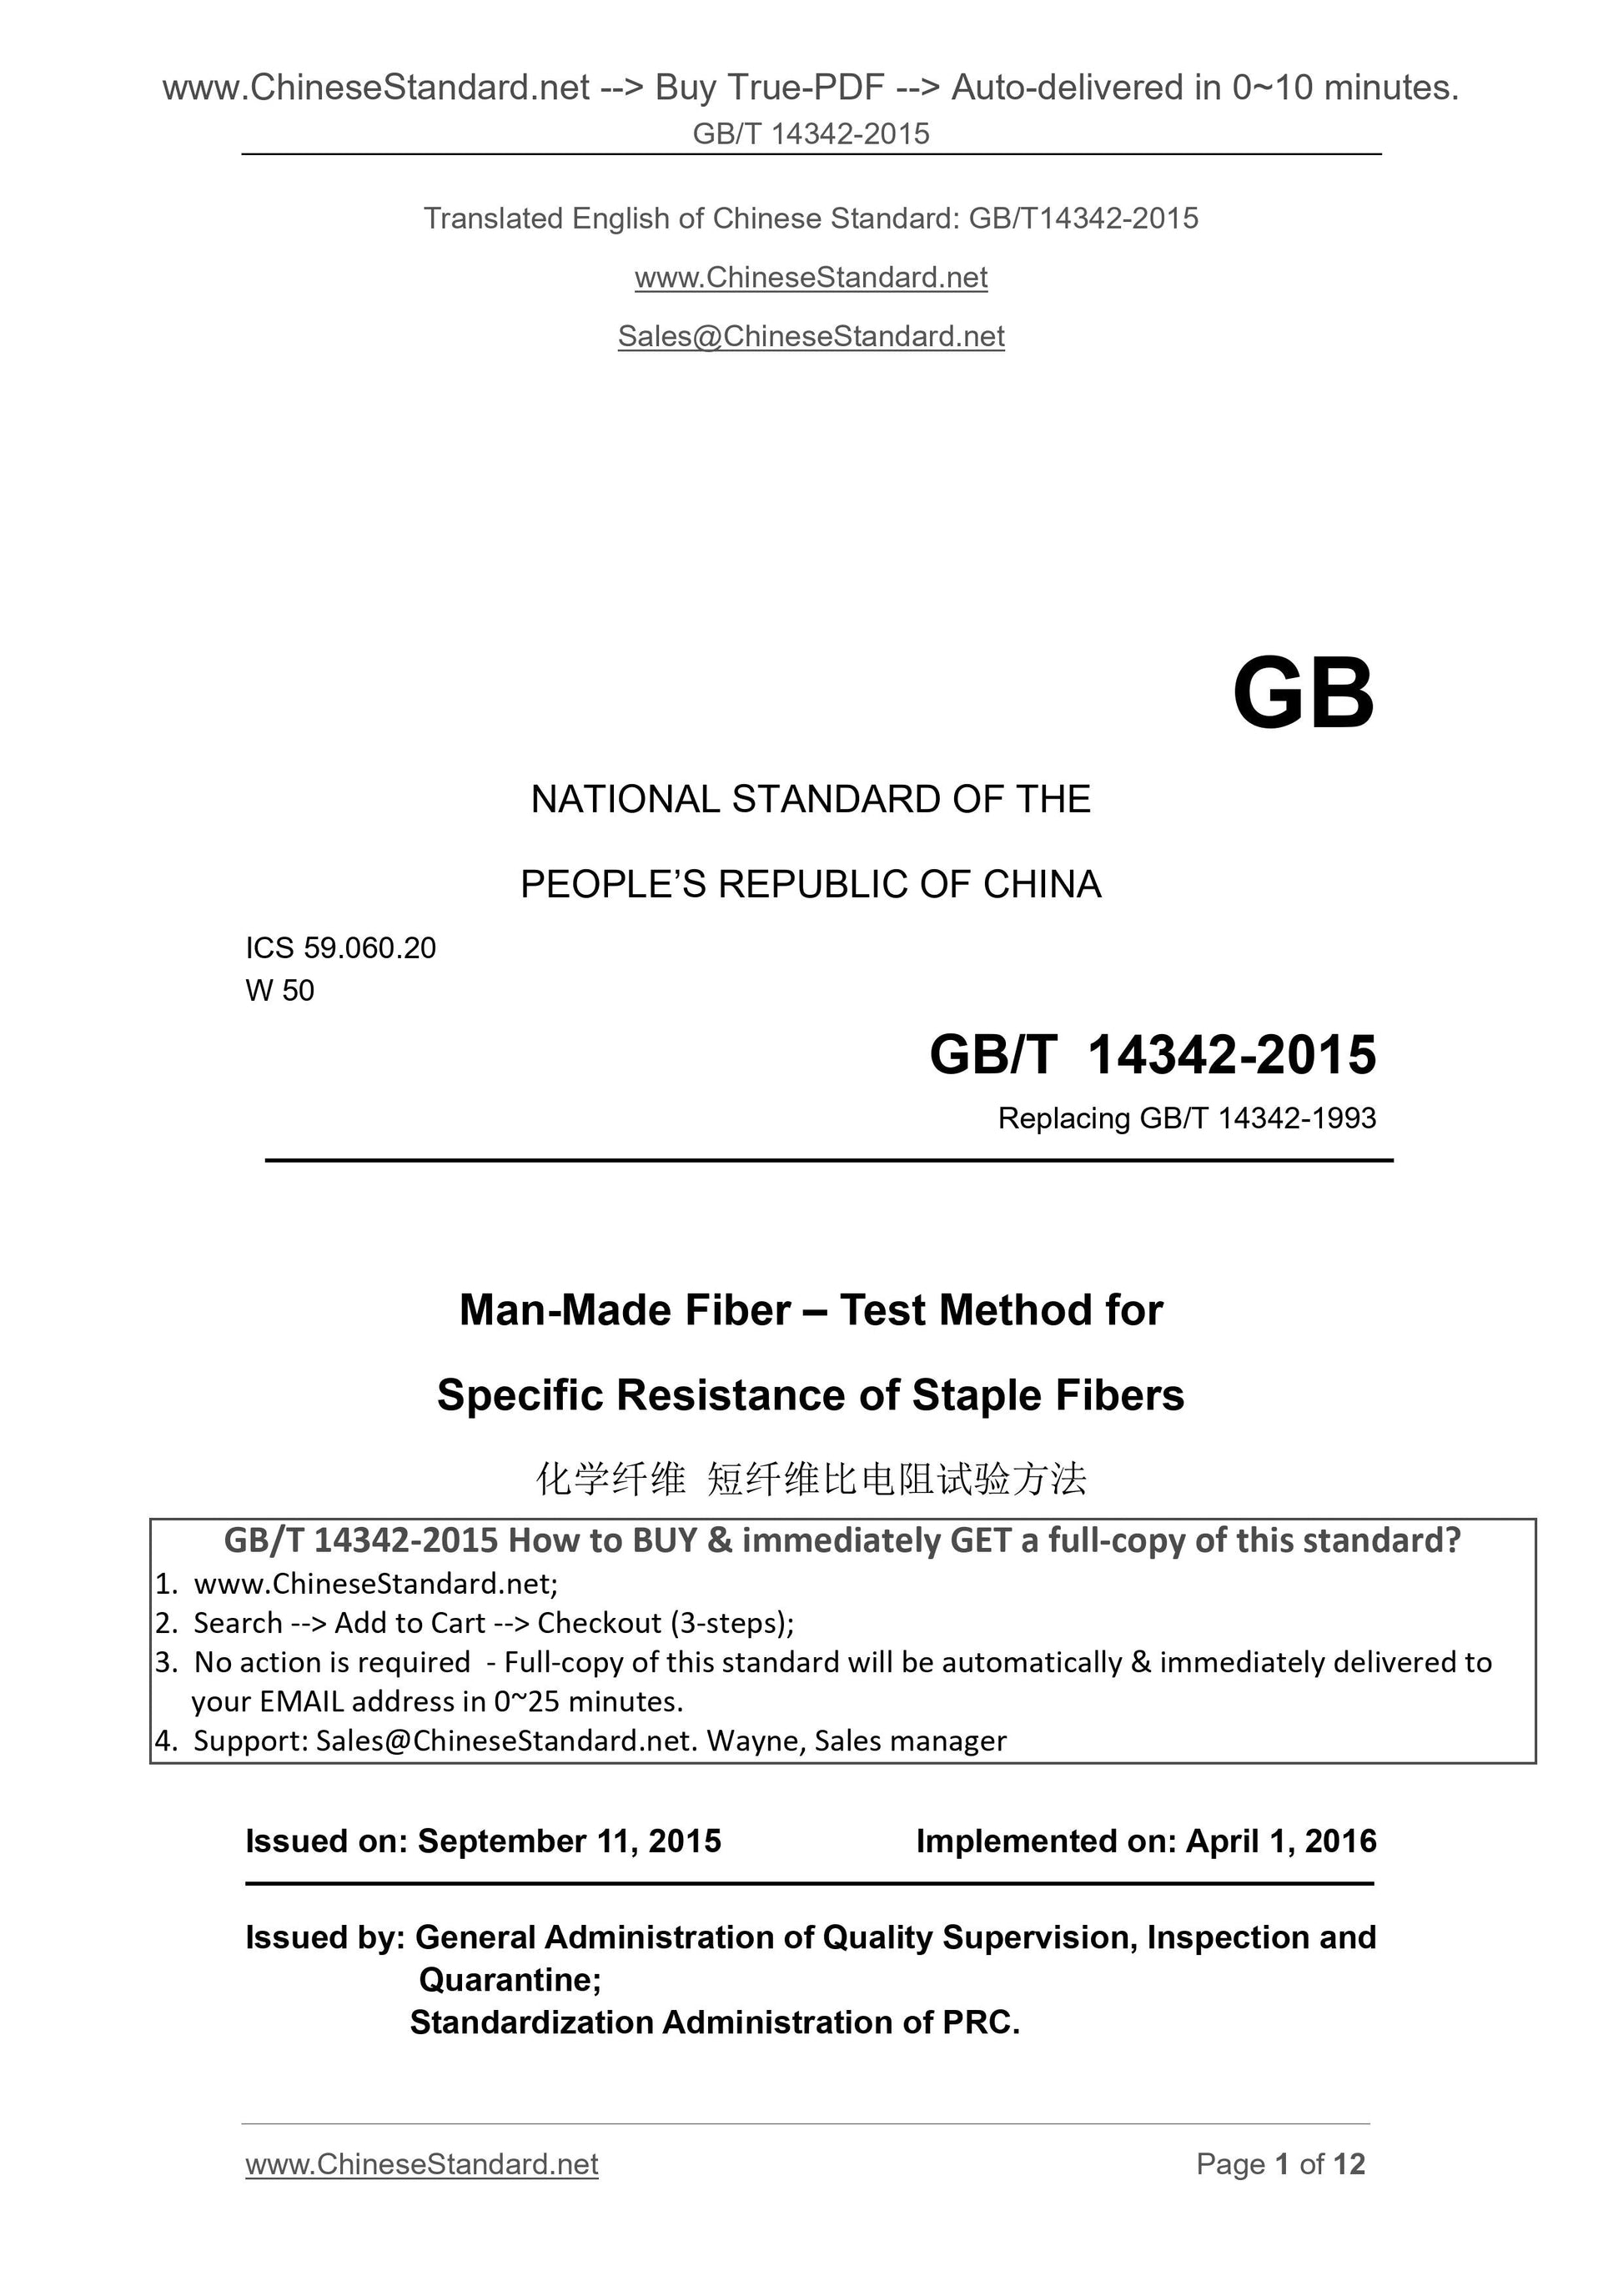 GB/T 14342-2015 Page 1